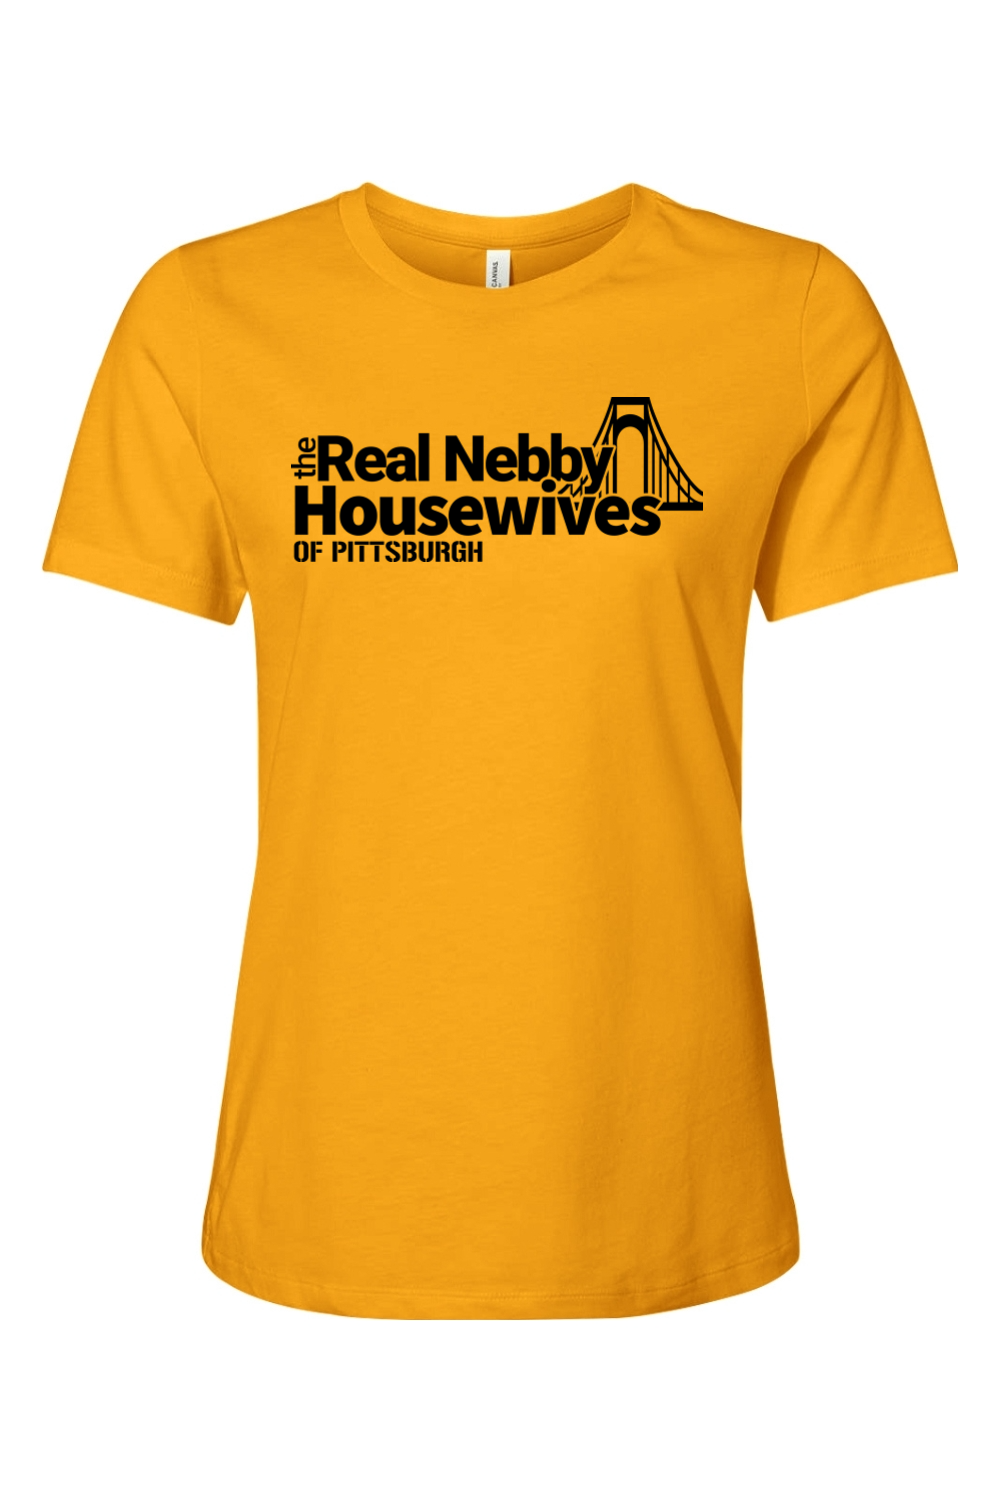 The Real Nebby Housewives of Pittsburgh - Ladies Tee - Yinzylvania